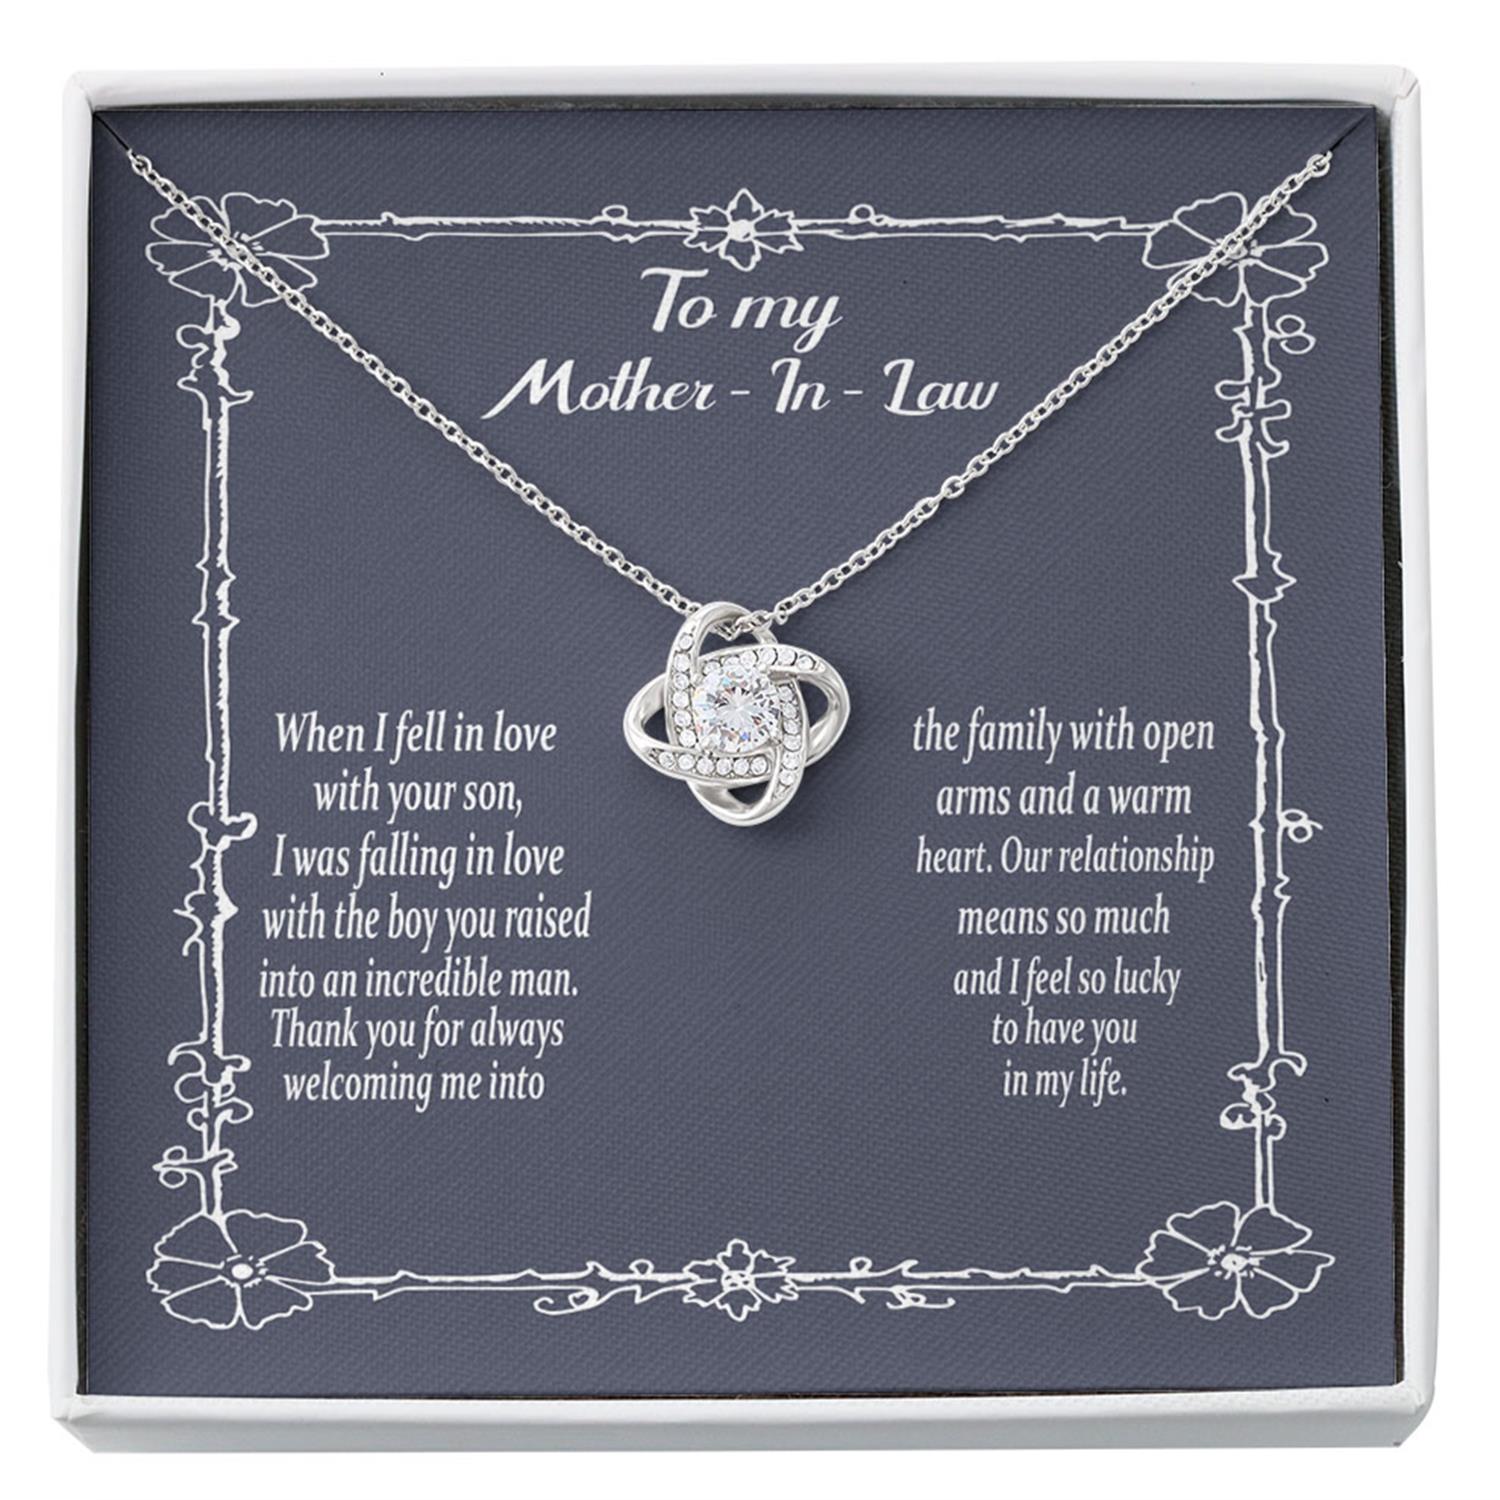 Mother-in-law Necklace, To My Mother-in-law, Gift For Mother-in-law, Mom-in-law Custom Necklace